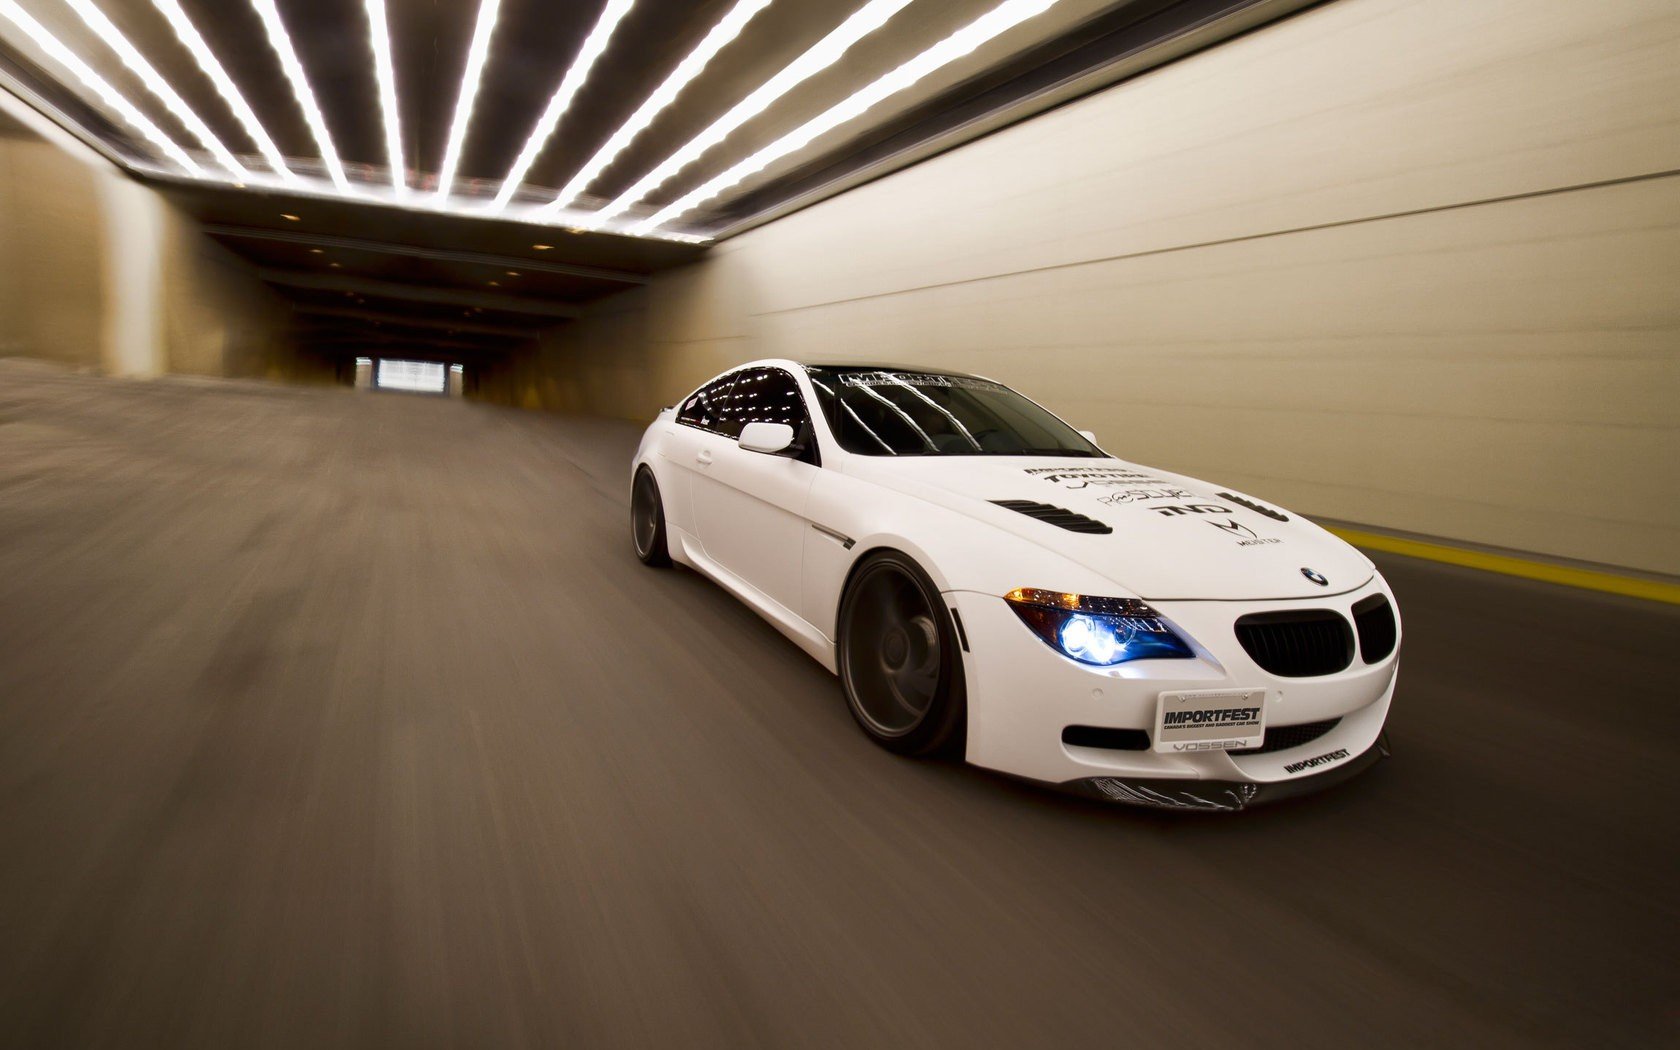 bmw, Cars, Tunnels, Tuning, White, Cars, Bmw, M6 Wallpaper